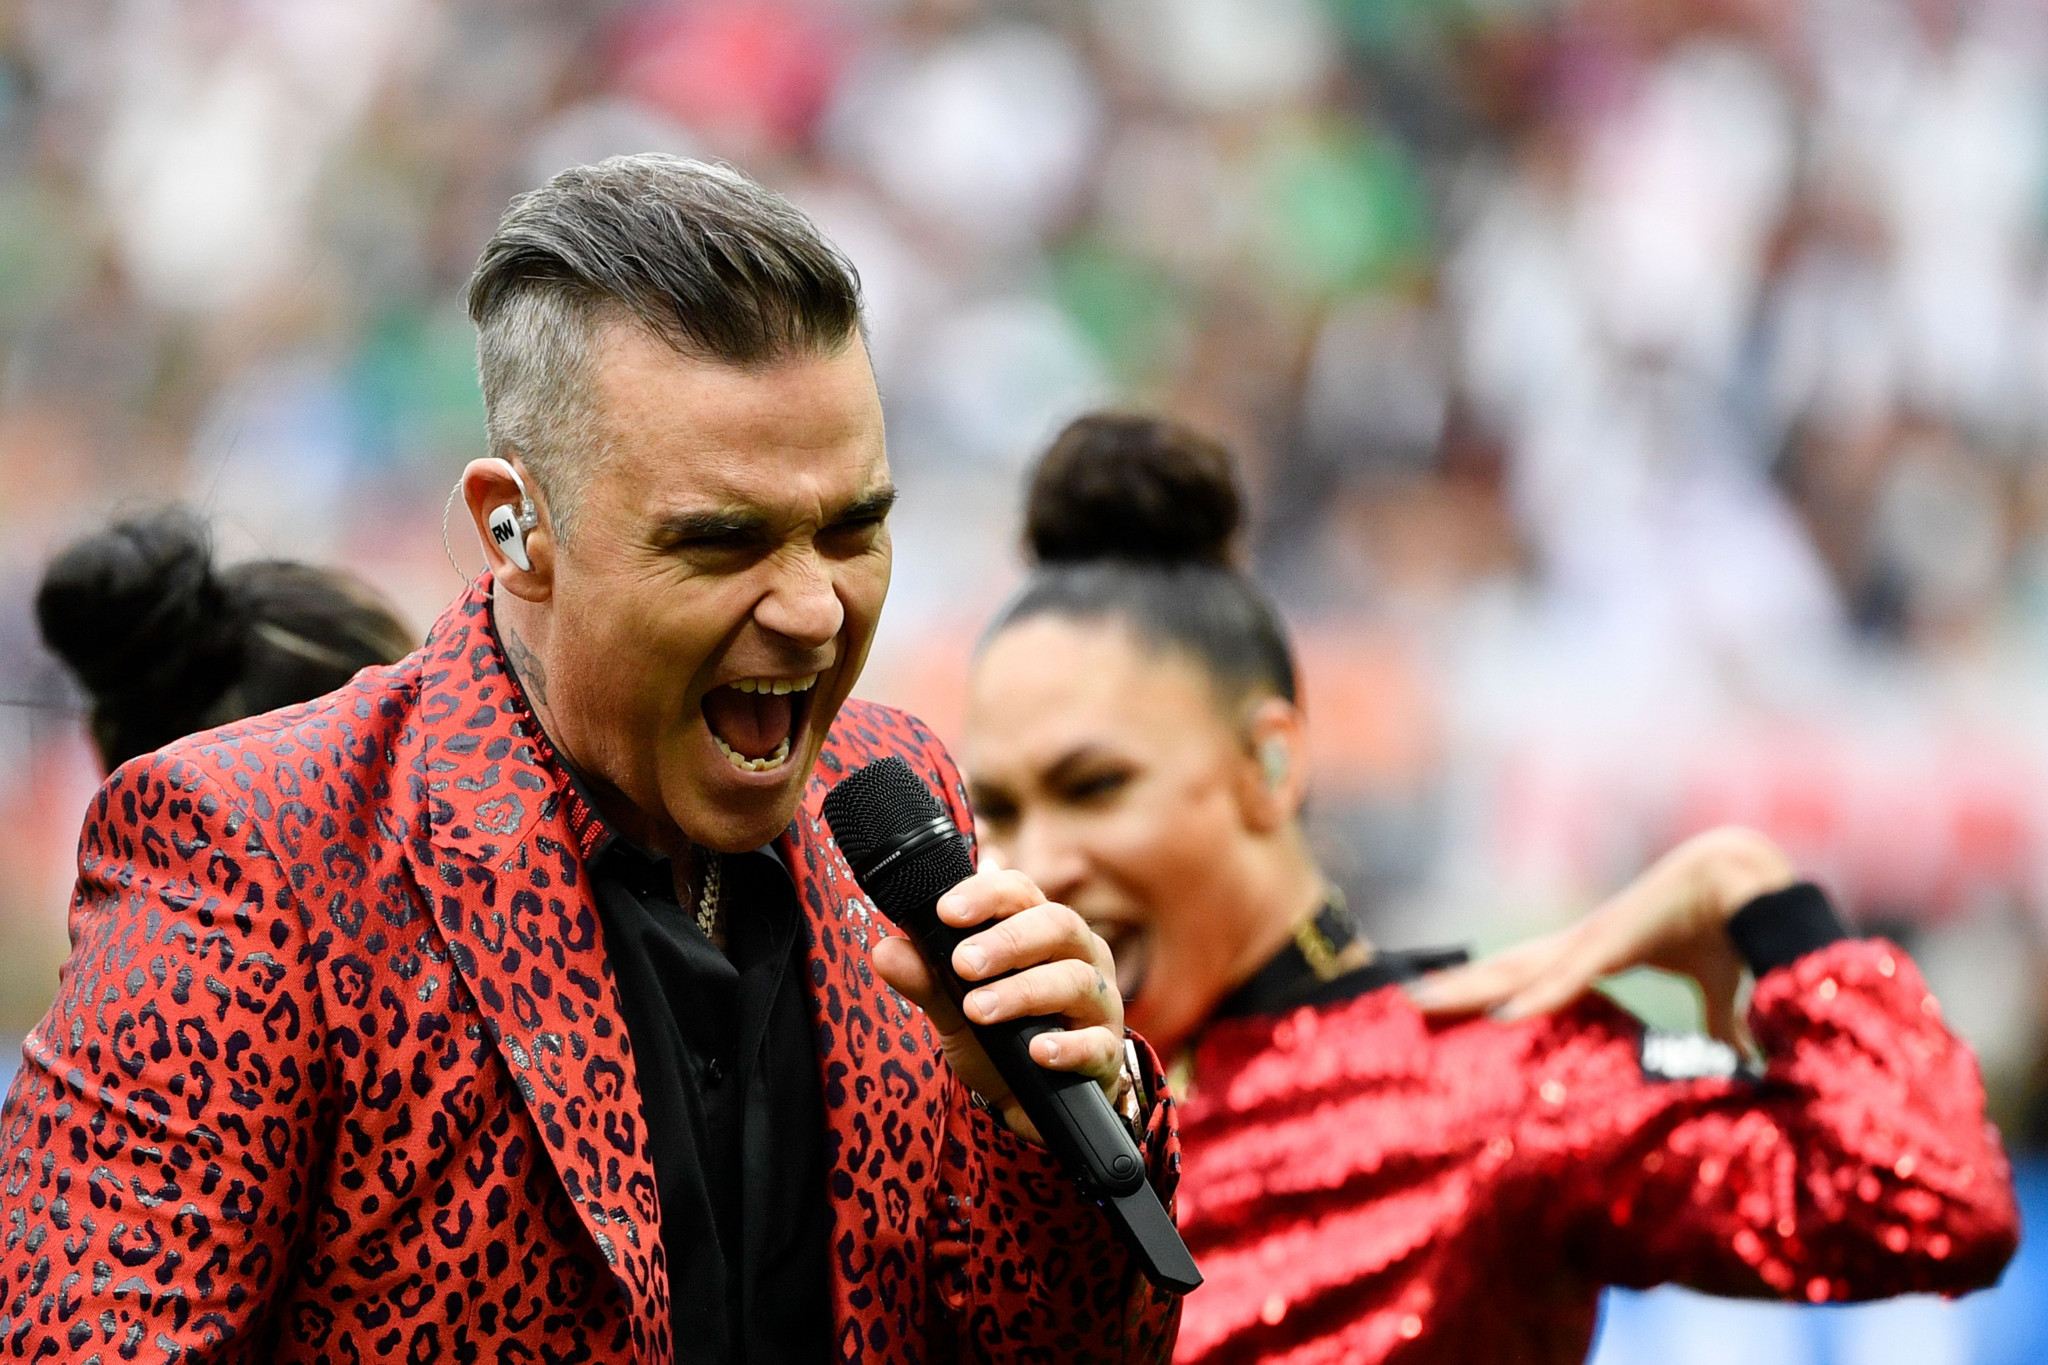 Robbie Williams performed during the Opening Ceremony ©Getty Images